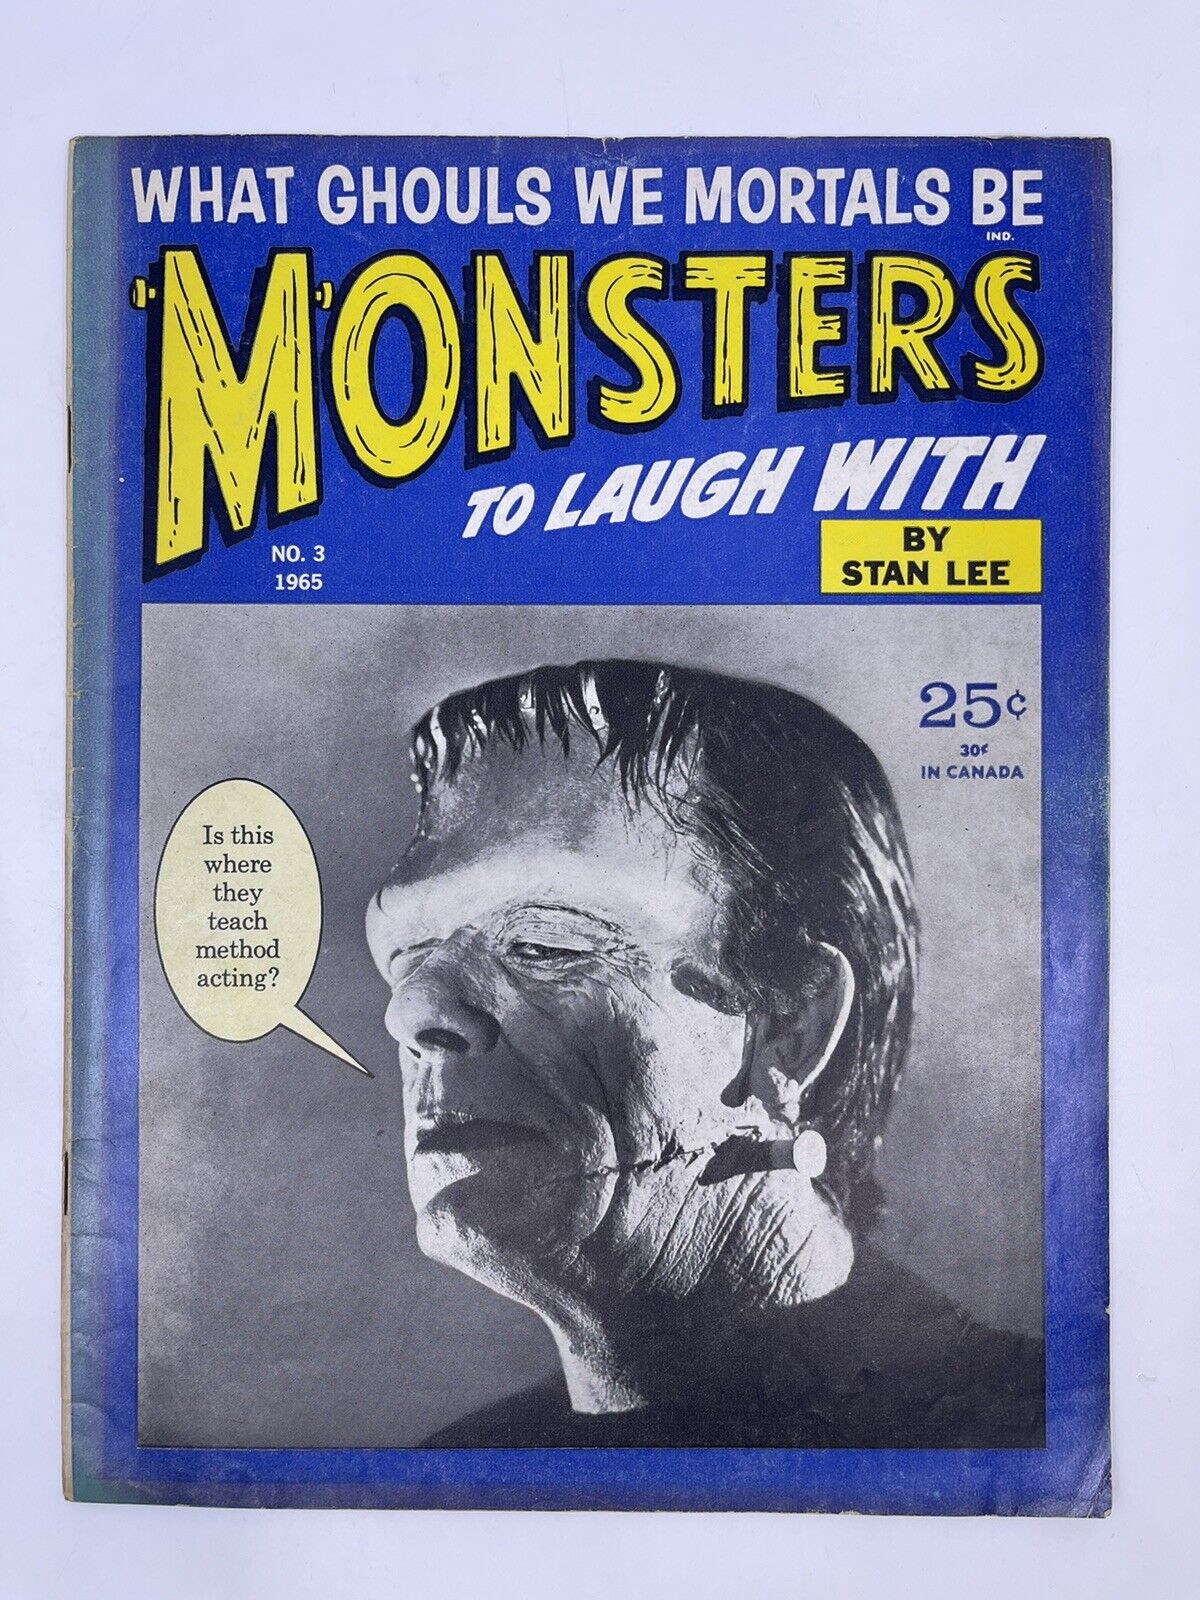 MONSTERS TO LAUGH WITH BY STAN LEE #3 Very Good 1964 Vintage Monster Parody